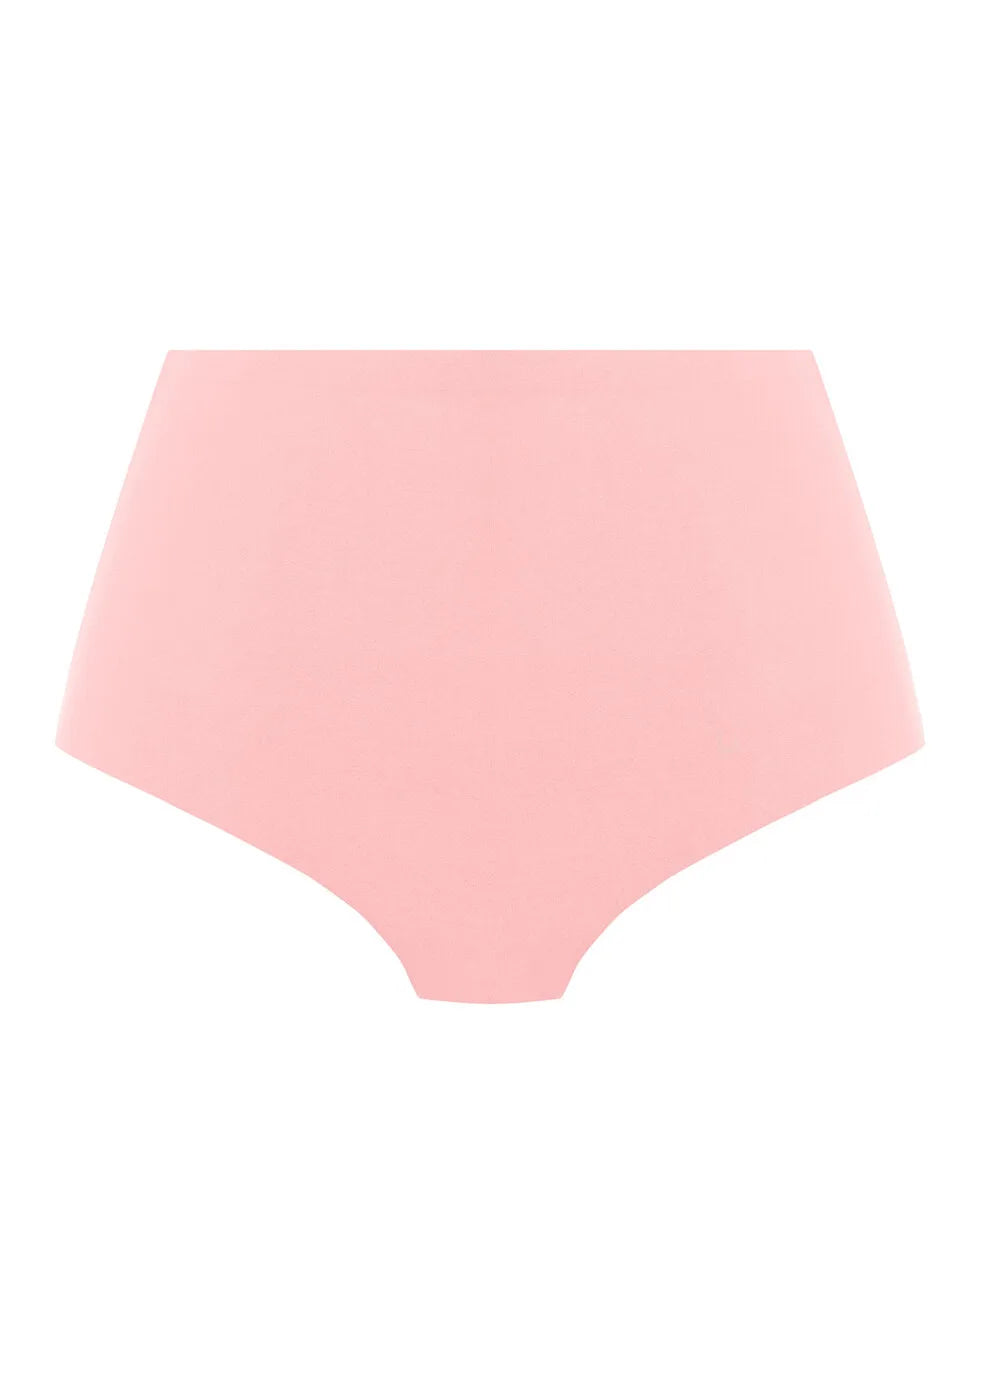 Smoothease Invisible Stretch Full Brief Panty by Fantasie at Belle Lacet Lingerie